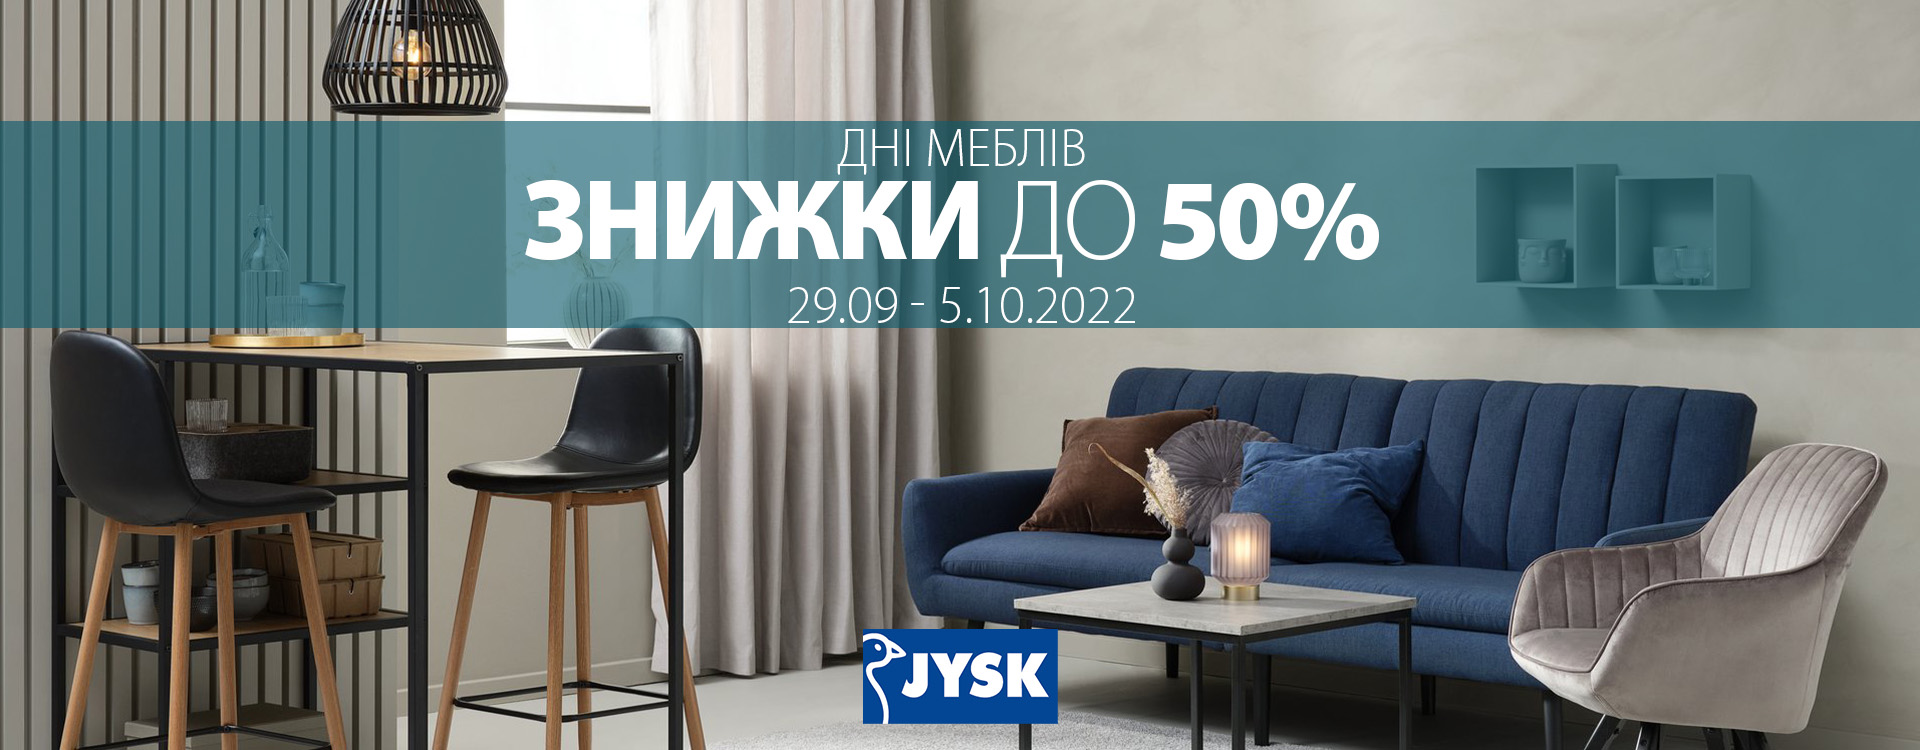 Discounts of up to 50% on JYSK furniture